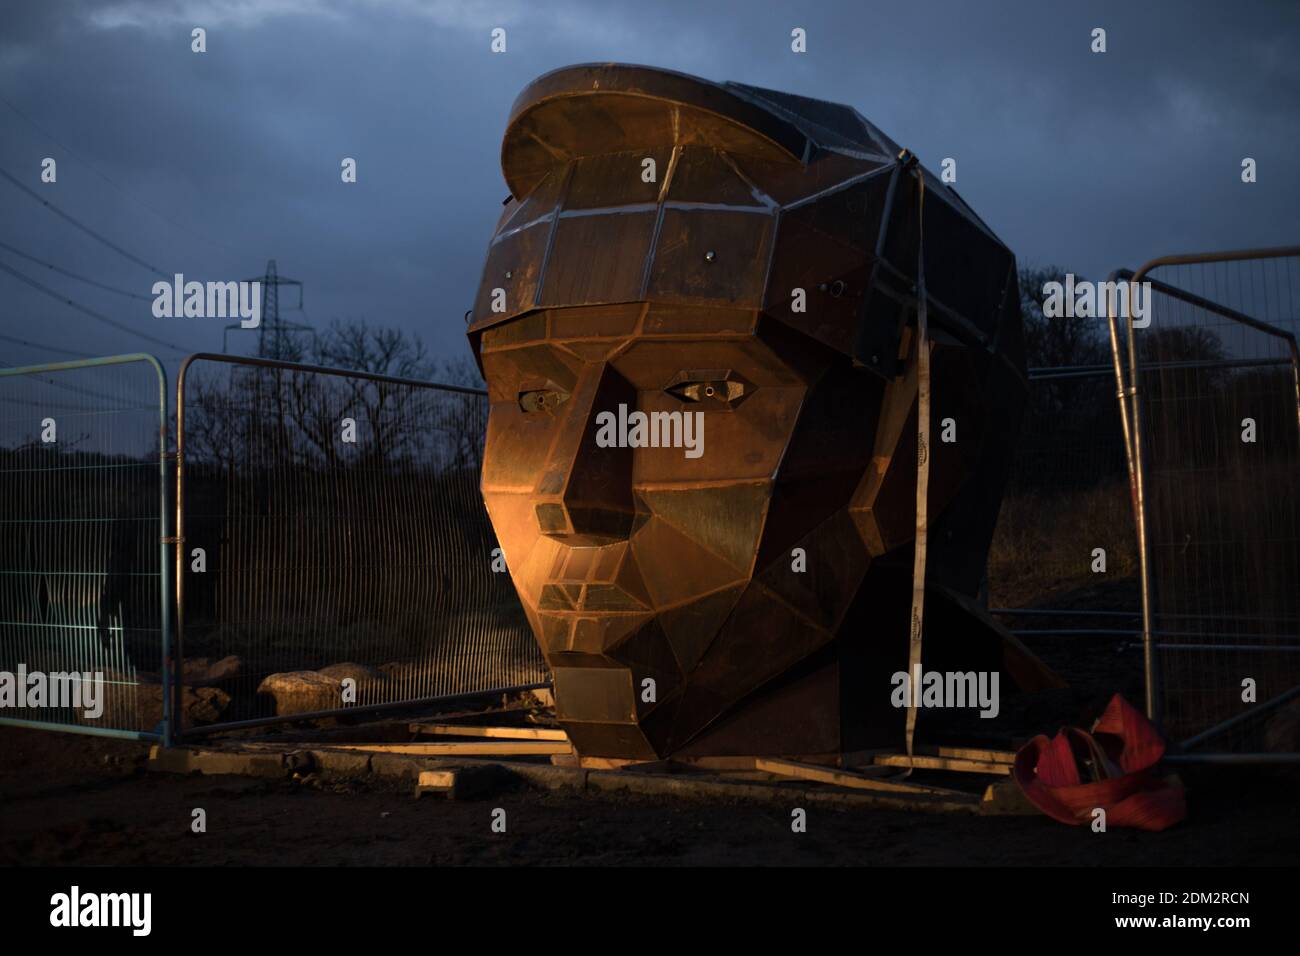 Nethercroy, Scotland, UK, 16th December 2020. Work continues on the installation of a 6-metre sculpture, by artist Svetlana Kondakova, of a Roman soldier's head, nick-named Silvanus - after the Roman God protector of fields, forest and cattle, and a name which chosen by a public vote, at the Nethercroy site on the route of the Roman-era Antonine Wall. The sculpture, built by Big Red Blacksmiths, was commissioned as part of a wider 'Rediscovering the Antonine Wall' project. Working across central Scotland the project aims to build better connections for communities and visitors along the length Stock Photo